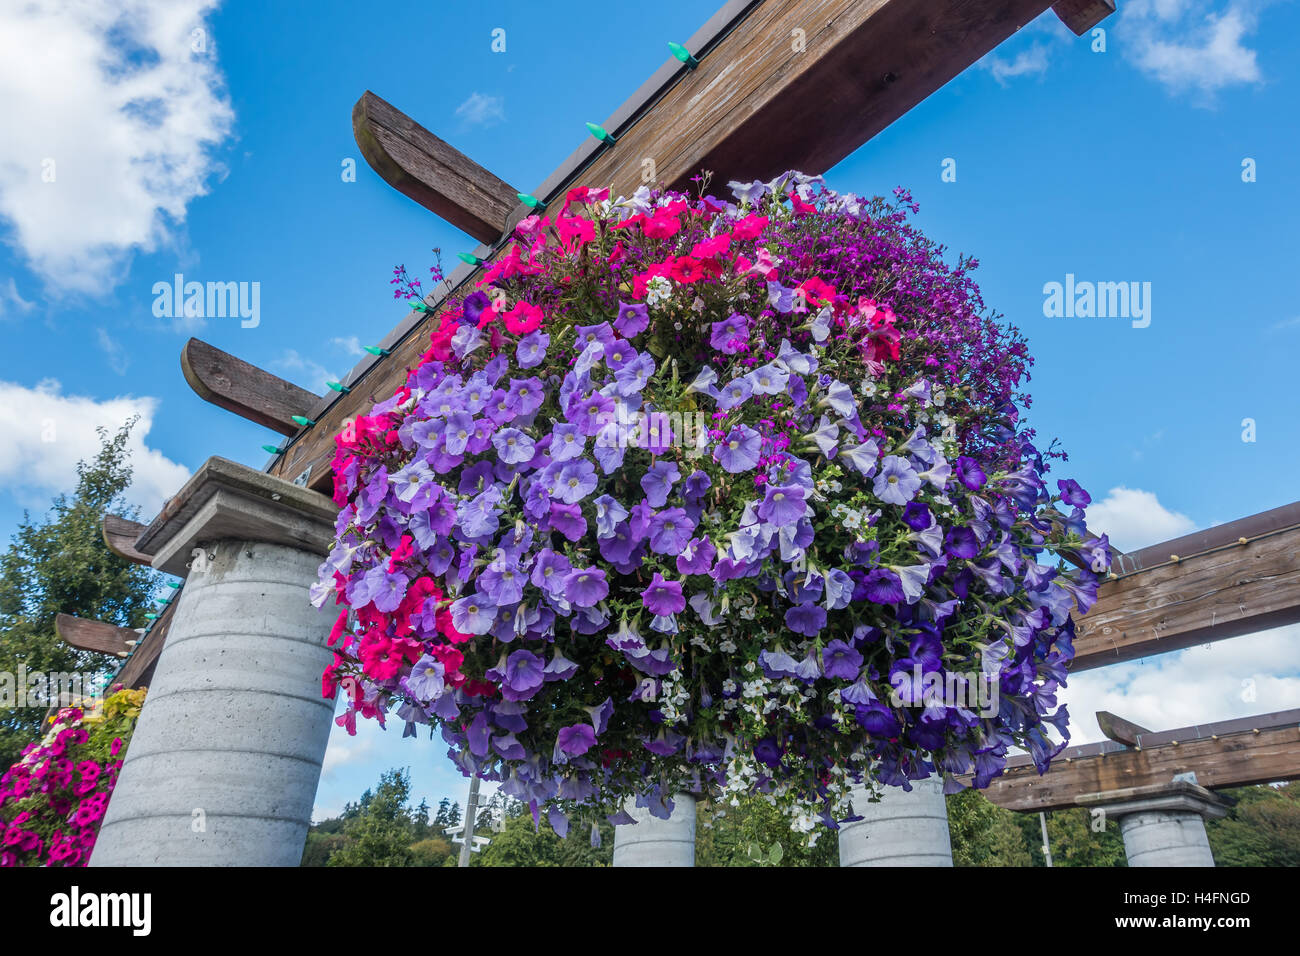 Pink and purple petunias burst with vibrant color in a hanging basket. Stock Photo